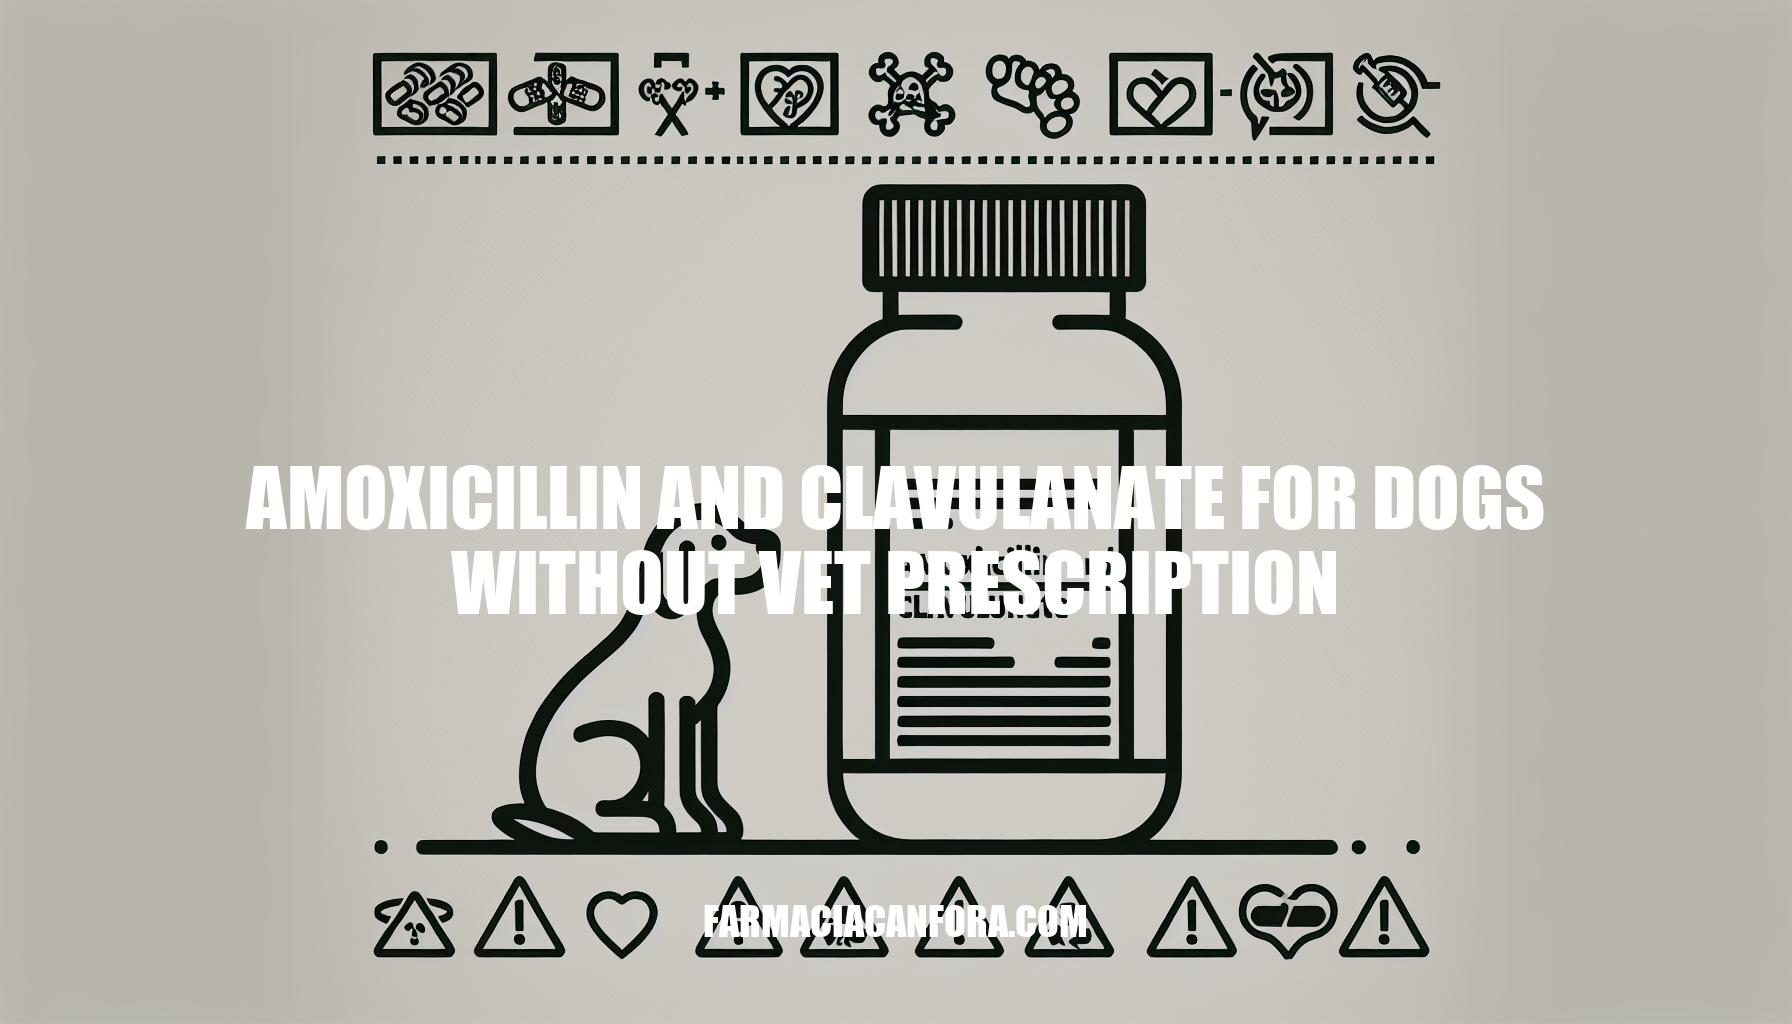 Using Amoxicillin and Clavulanate for Dogs Without Vet Prescription